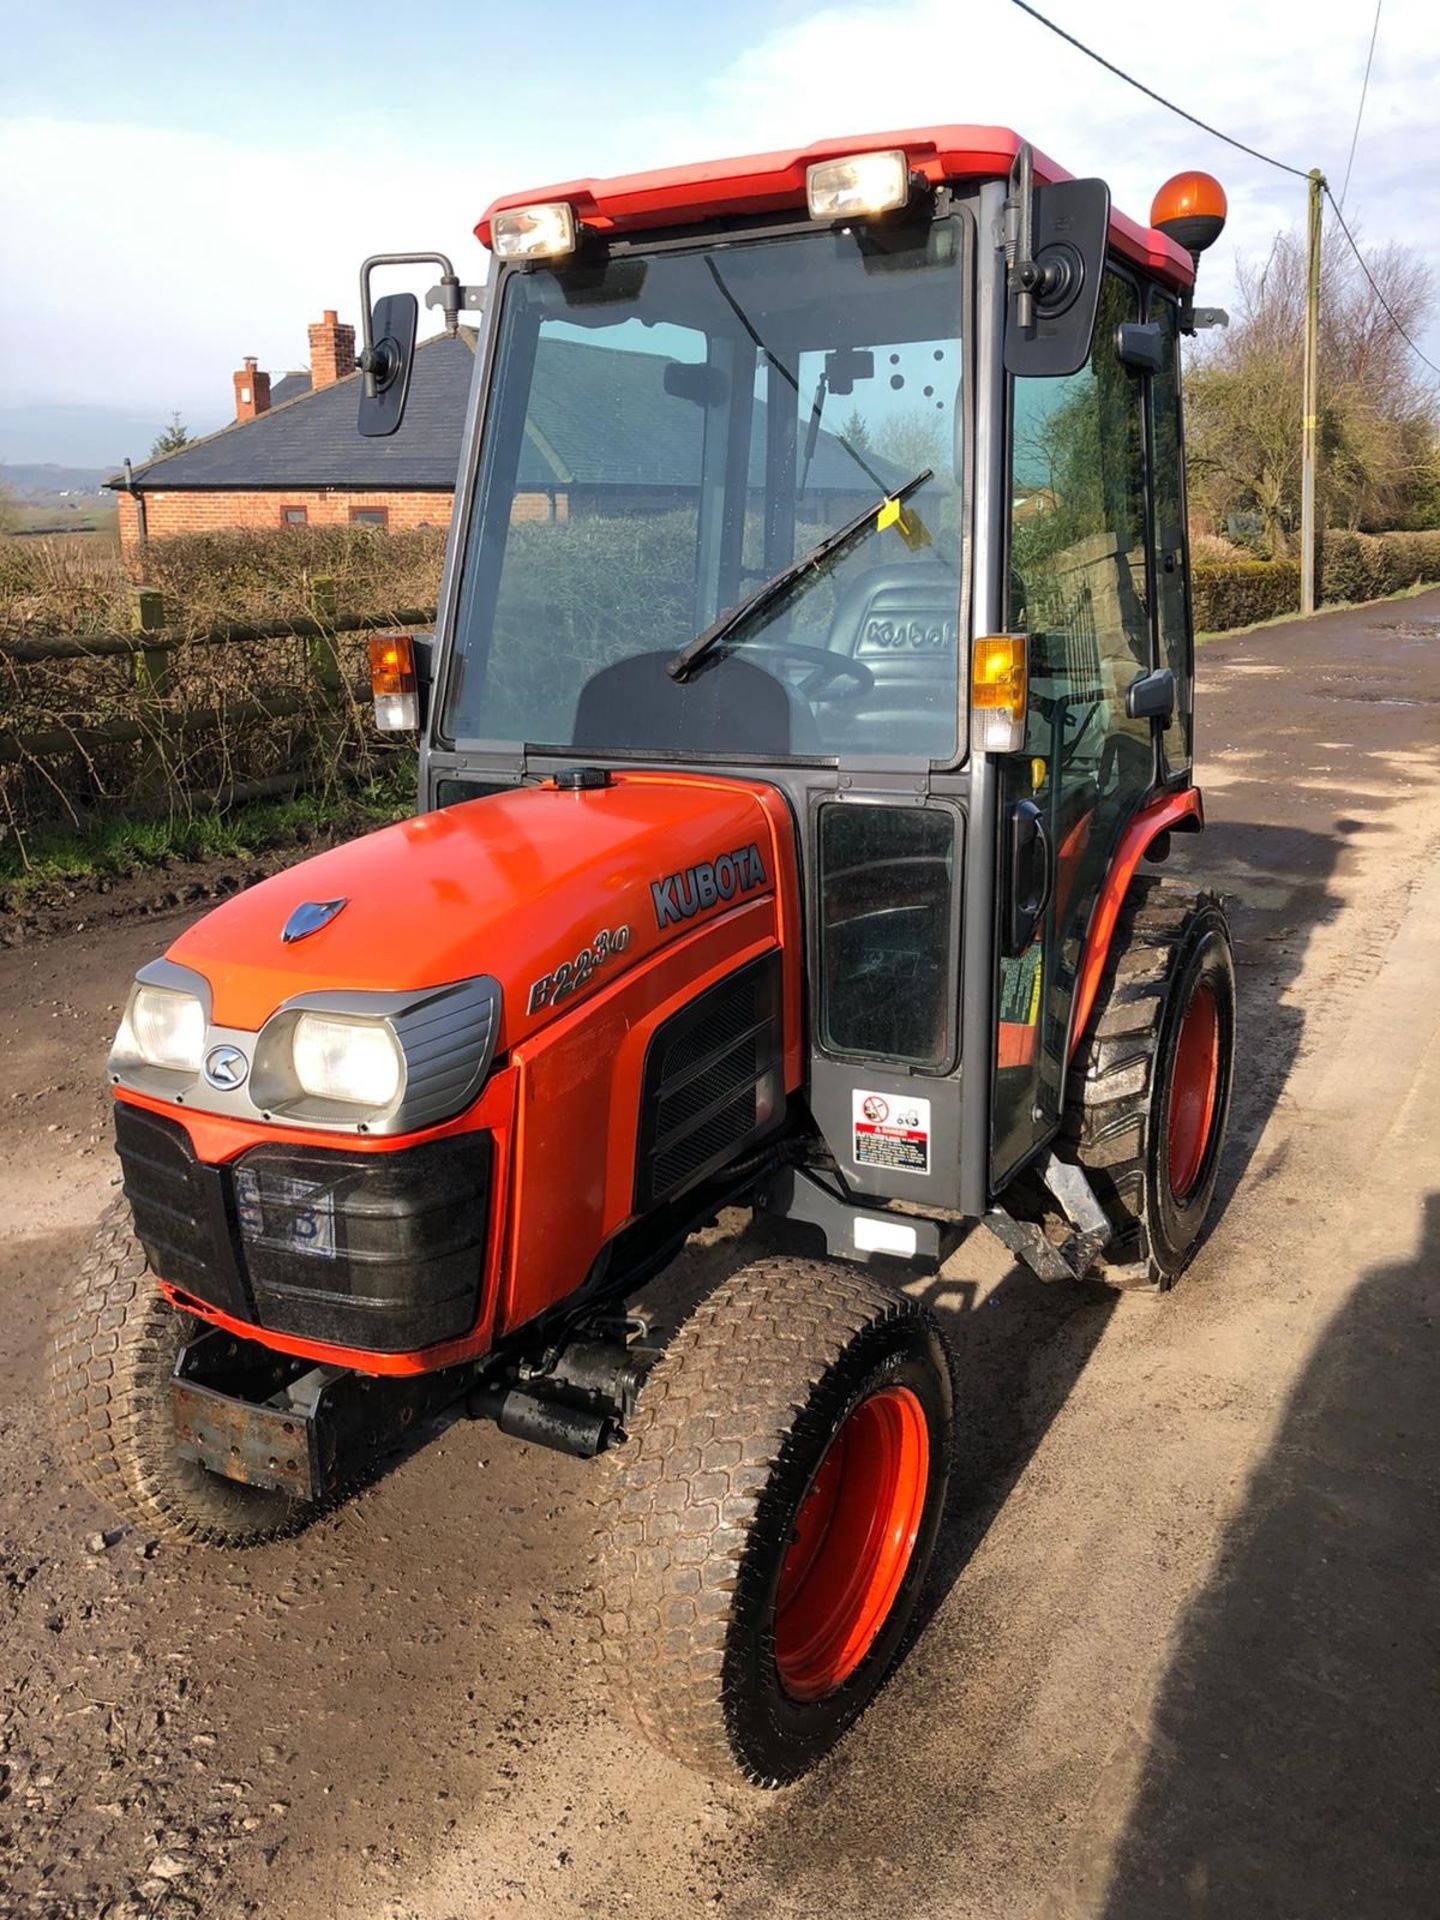 KUBOTA B2230 COMPACT TRACTOR, MODEL B2230, FULL GLASS CAB, 3 POINT LINKAGE, REAR PTO, 4WD *PLUS VAT* - Image 2 of 4